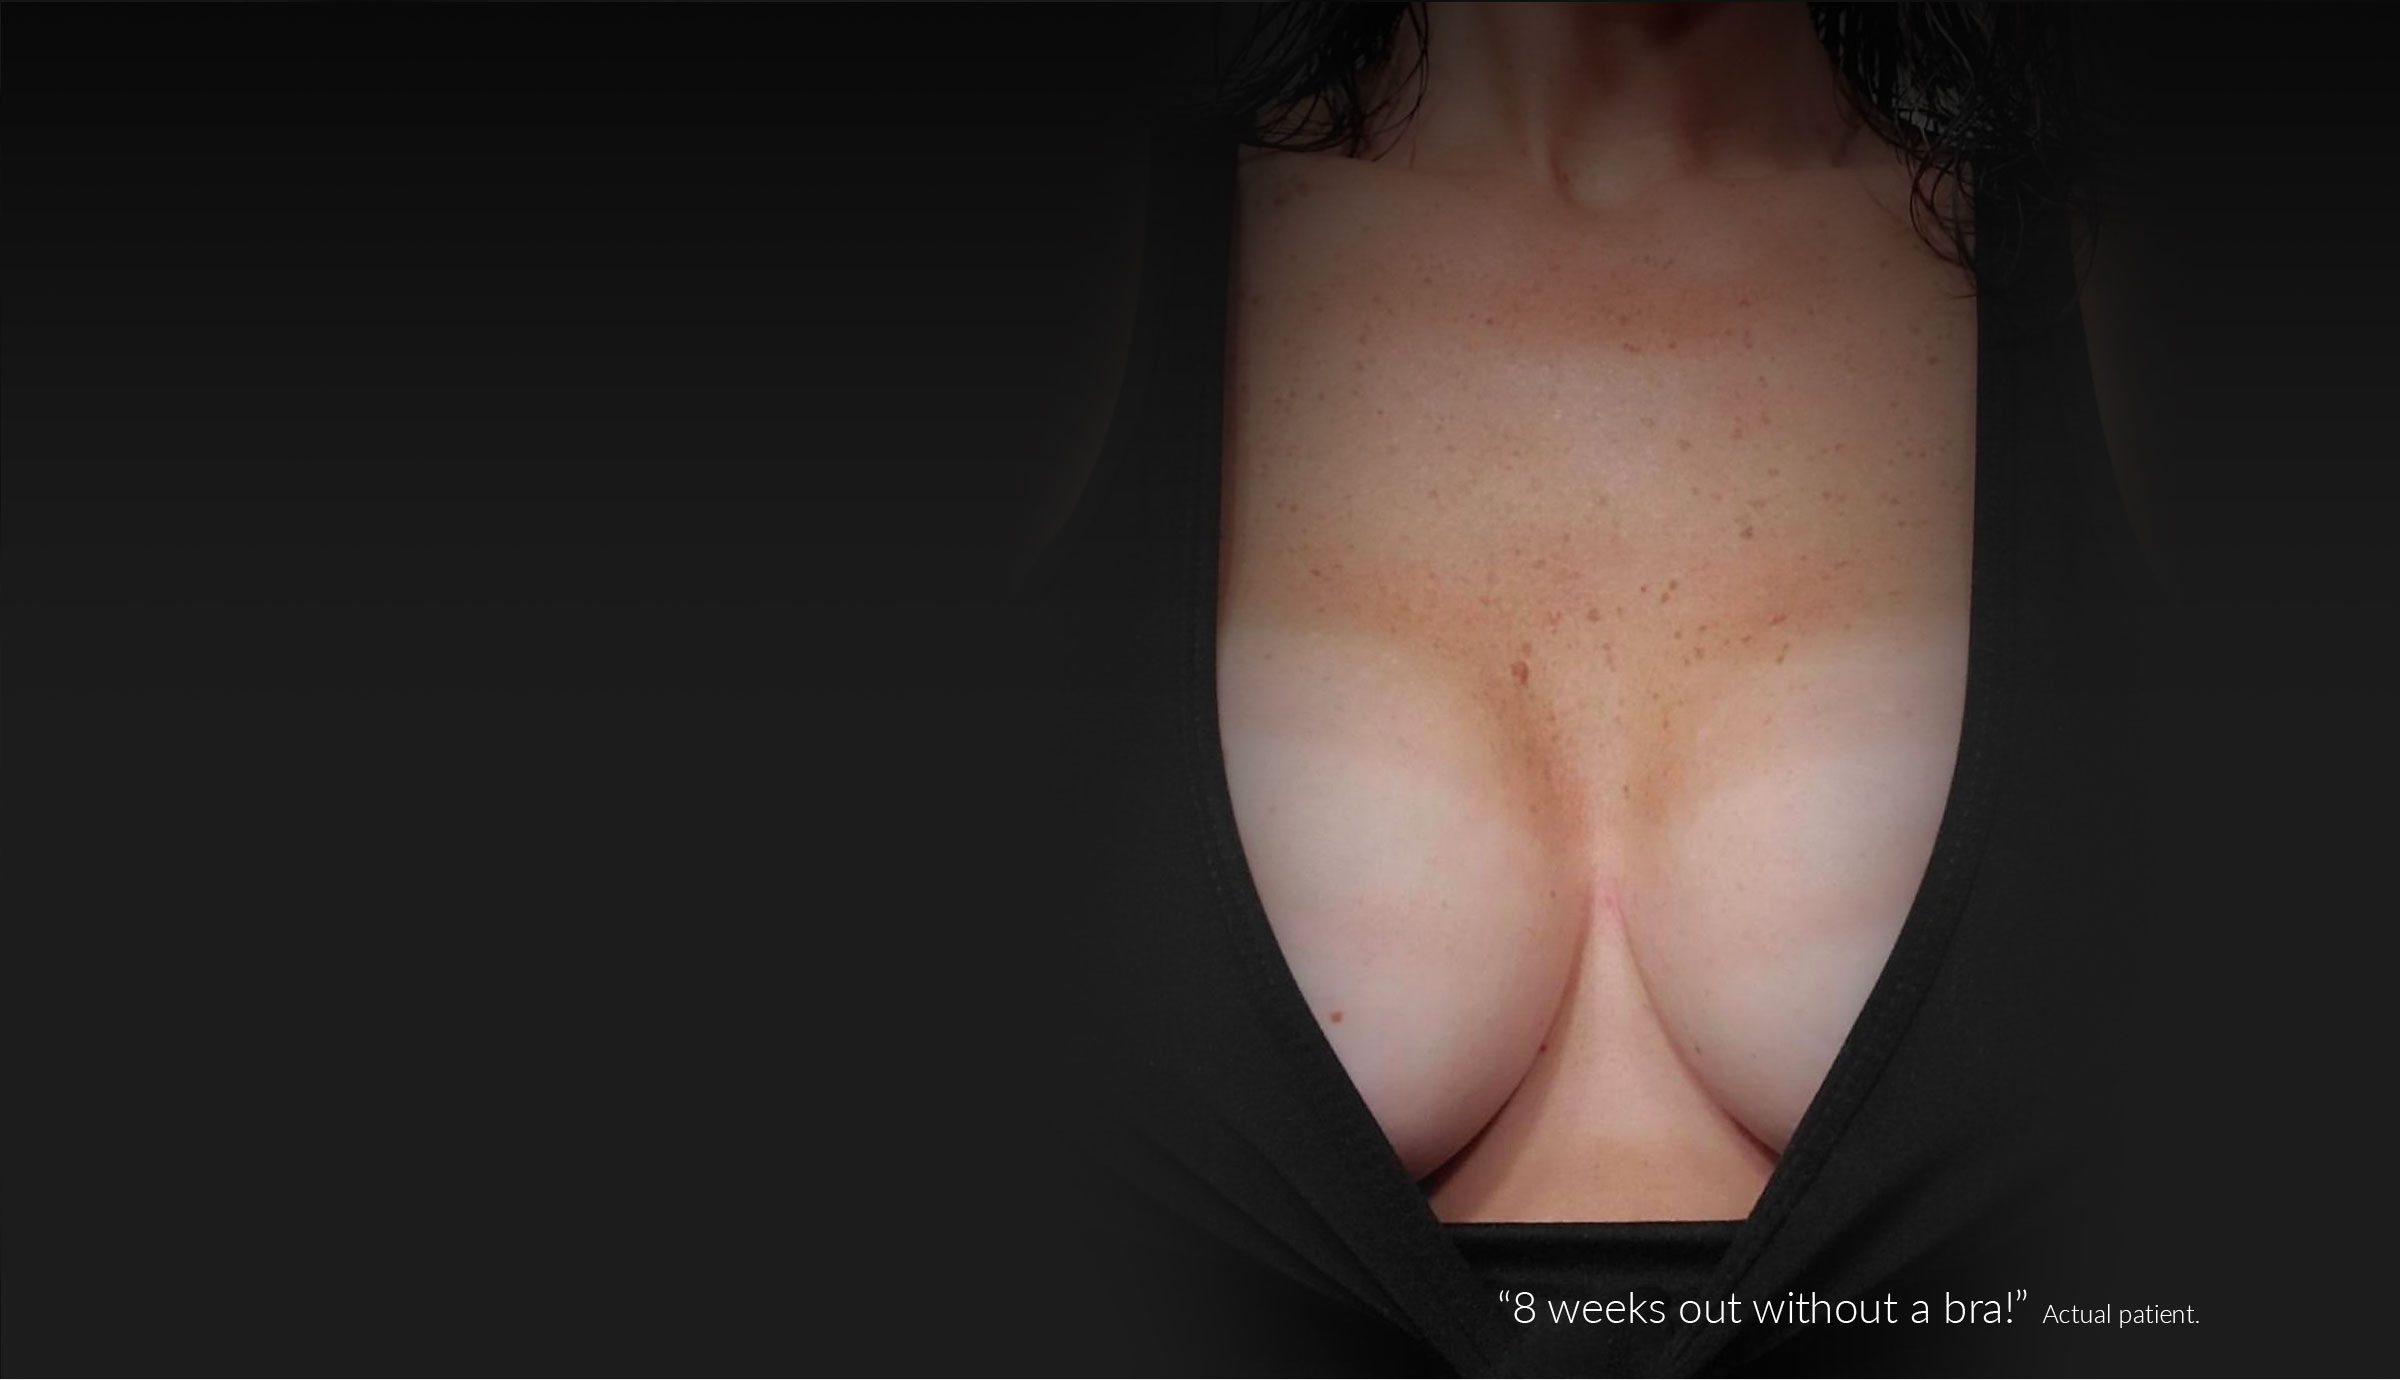 "8 weeks out, without a bra!" - Actual Philadelphia Breast Augmentation Patient